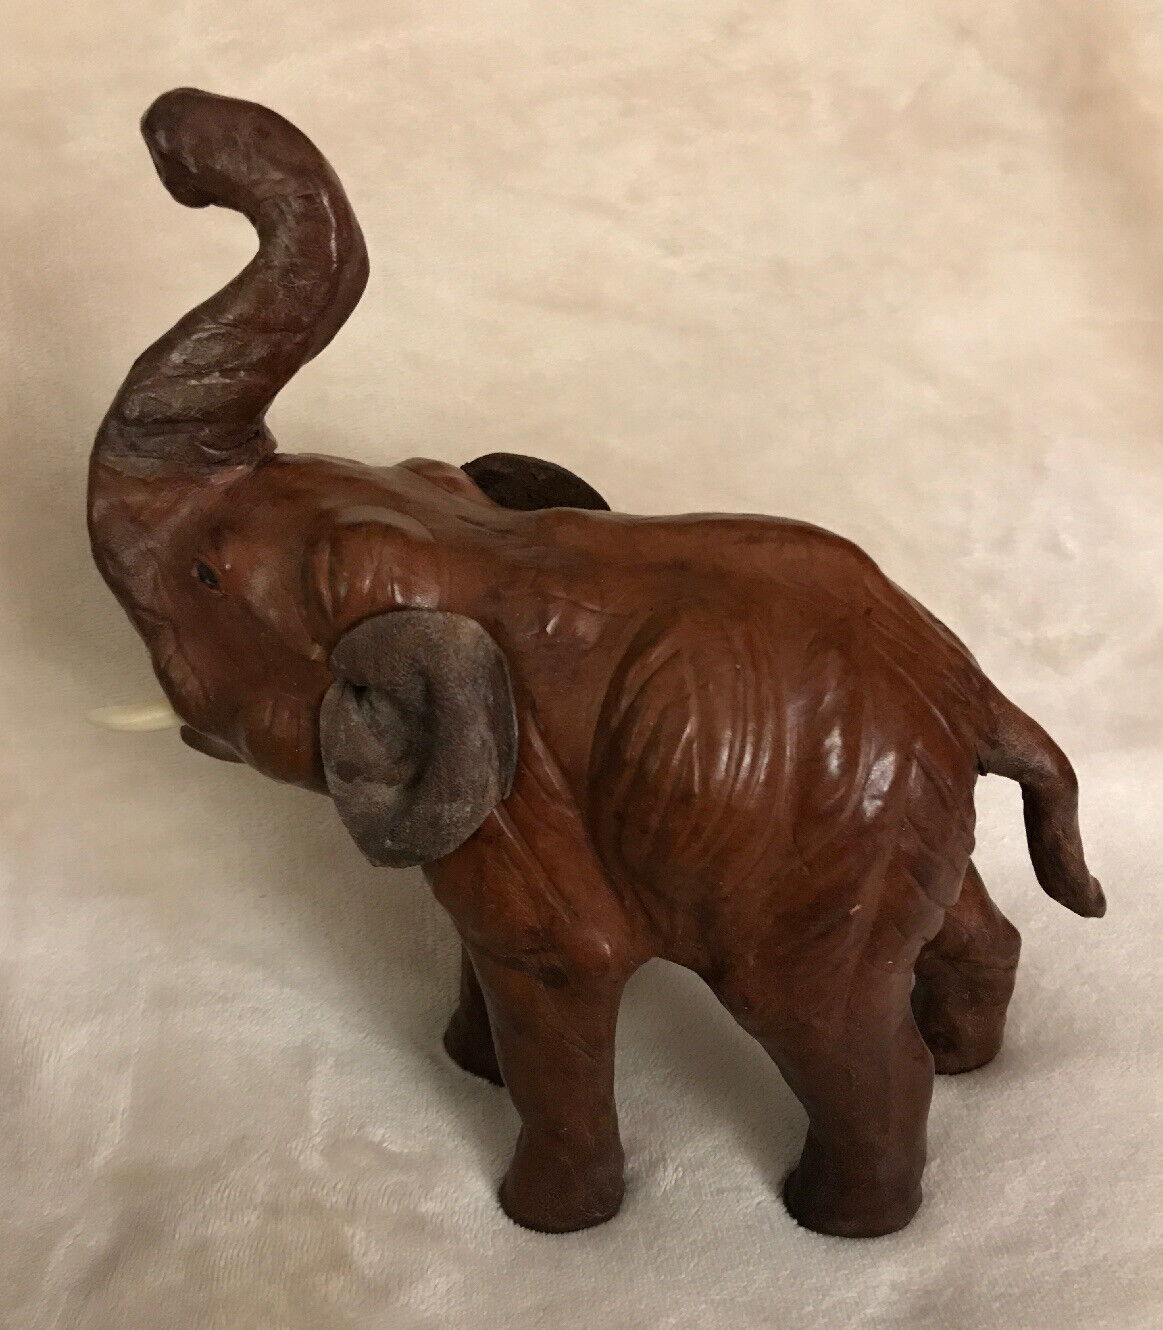 Vintage Elephant Leather Brown Figure Figurine w/Trunk Up -Exceptional Condition